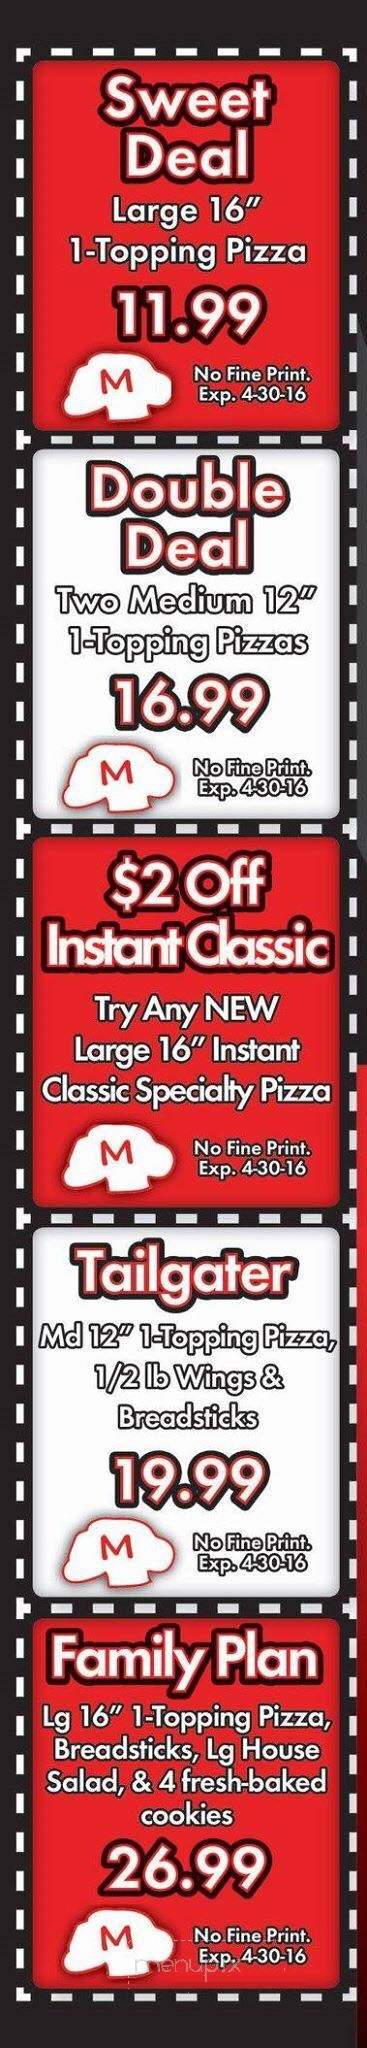 Master Pizza - Twinsburg, OH